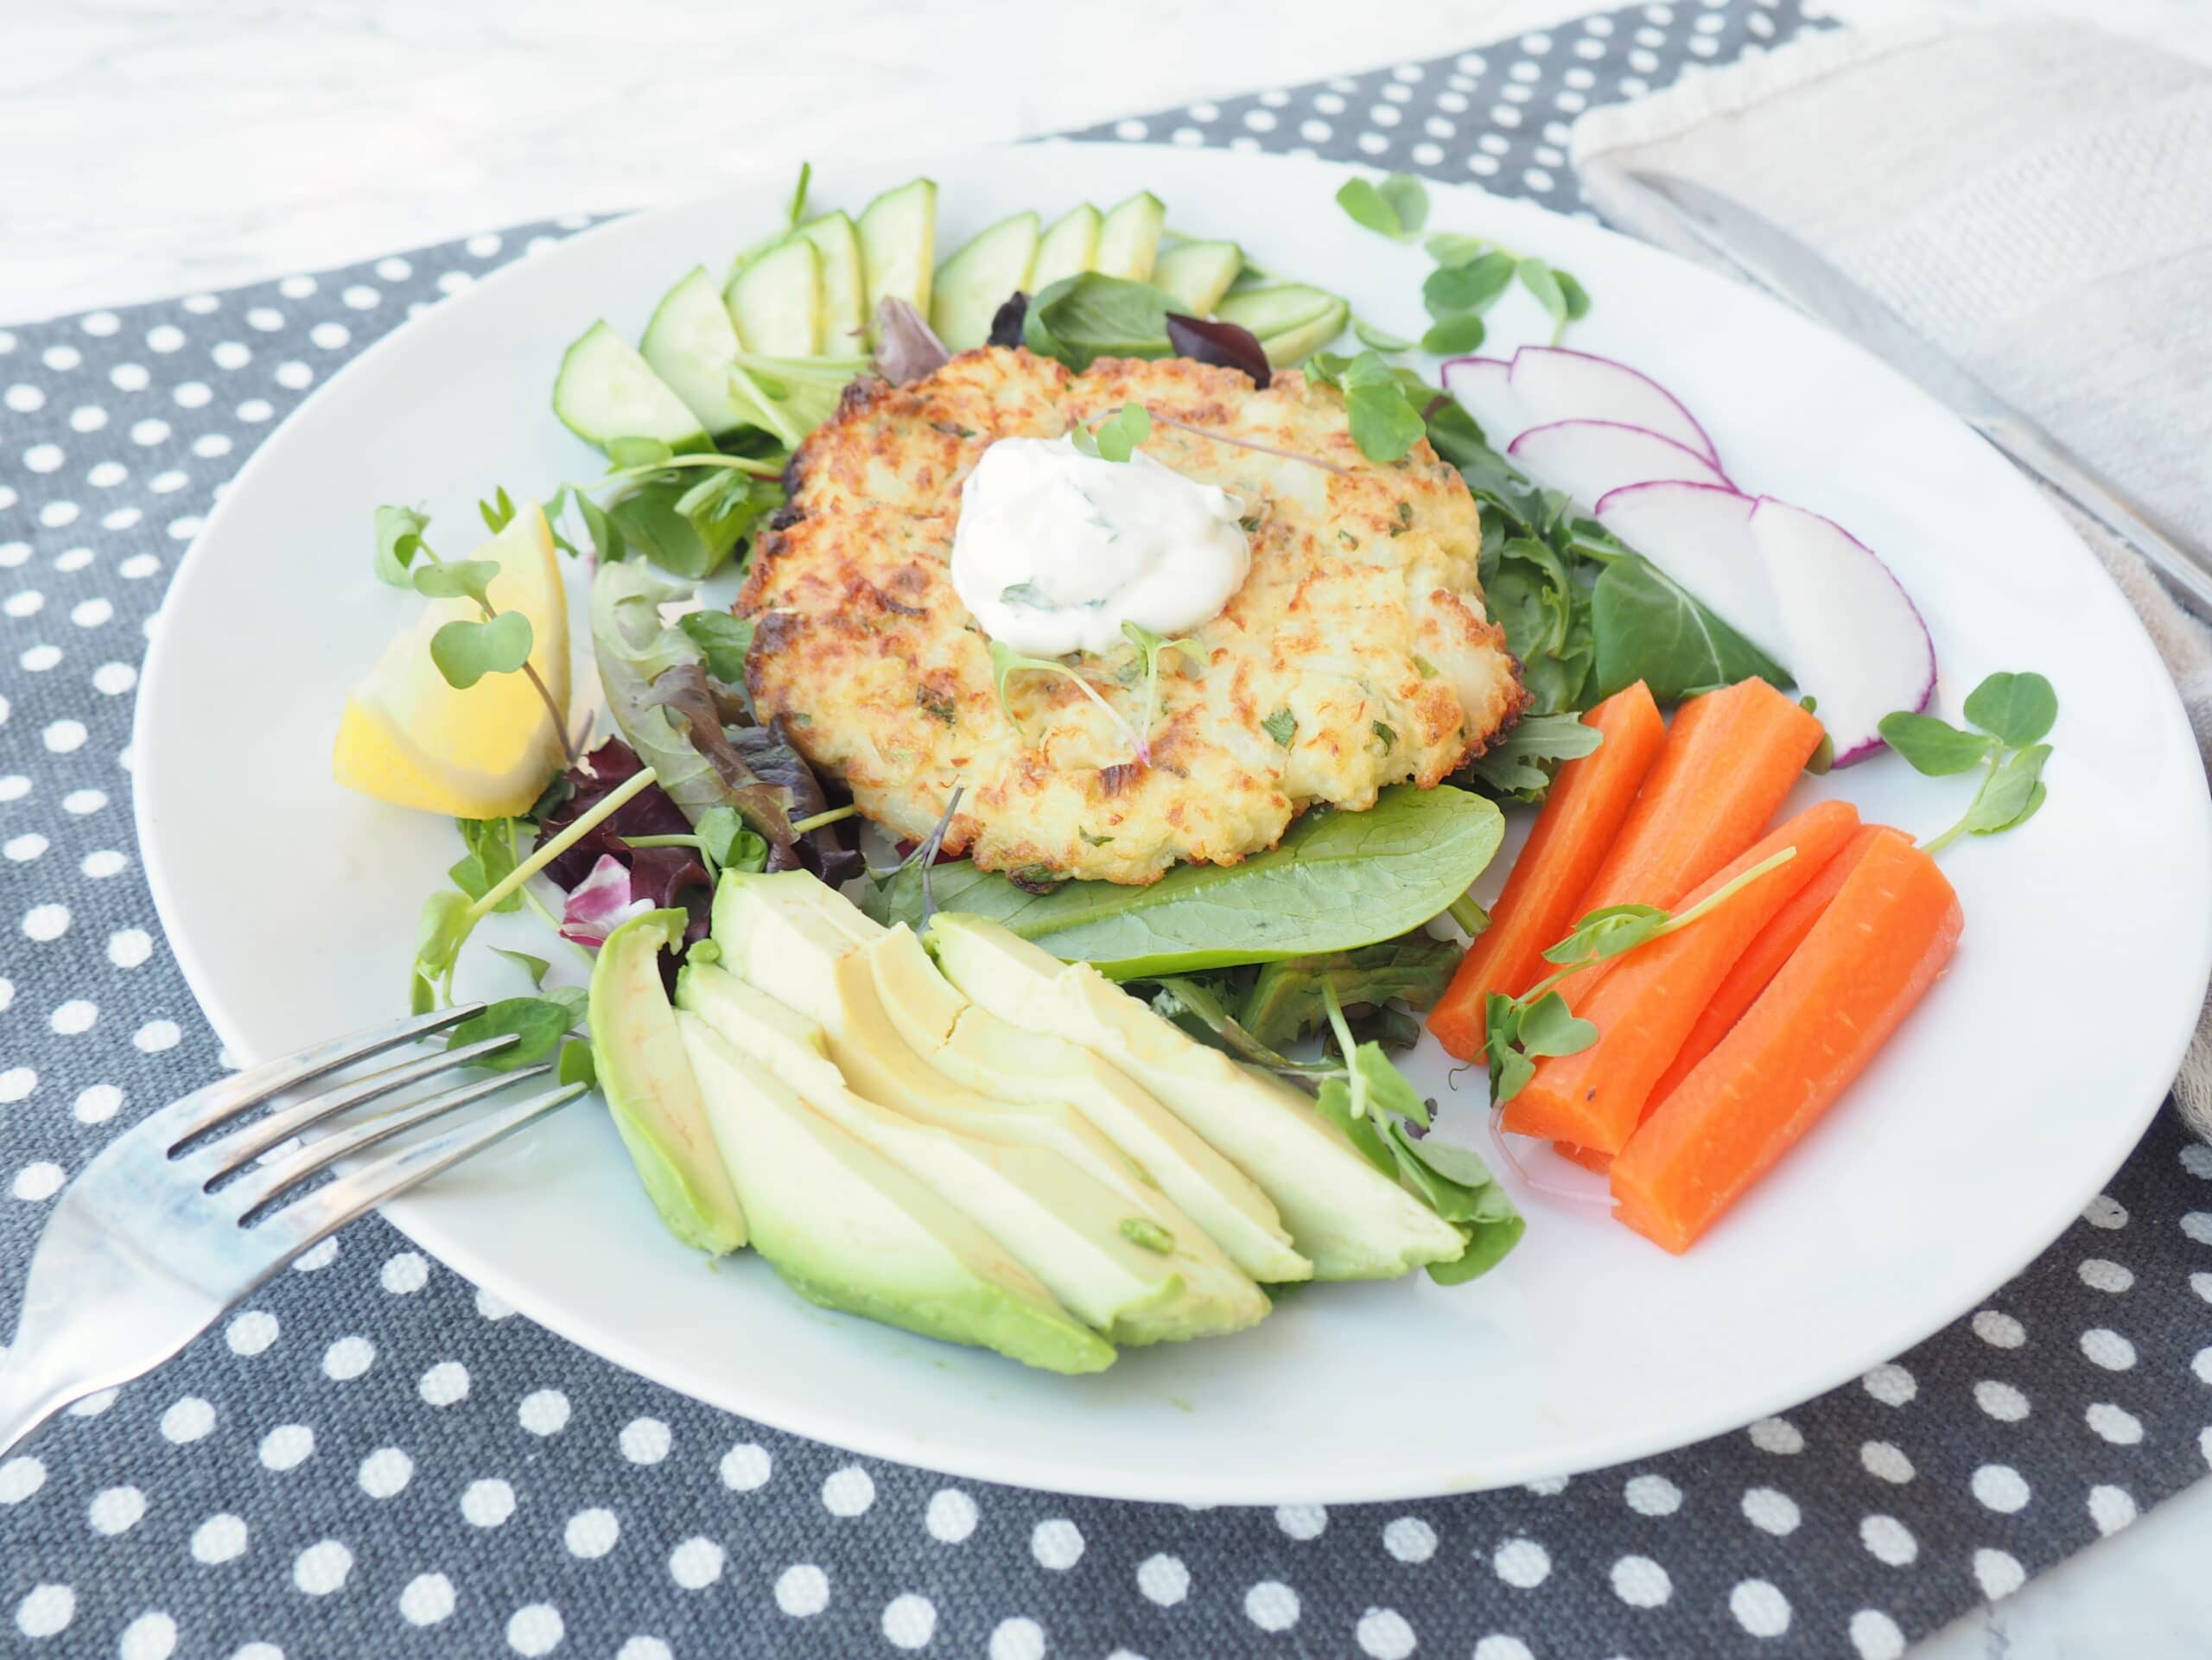 These cod cakes were inspired by my Swedish cooking mom after she suggested I make them. Cod cakes may not be as popular here in the US as crab cakes, but in my opinion, they should be. You can, of course, use any fish, but cod and other similar white fish such as haddock and hake, tend to work really well.